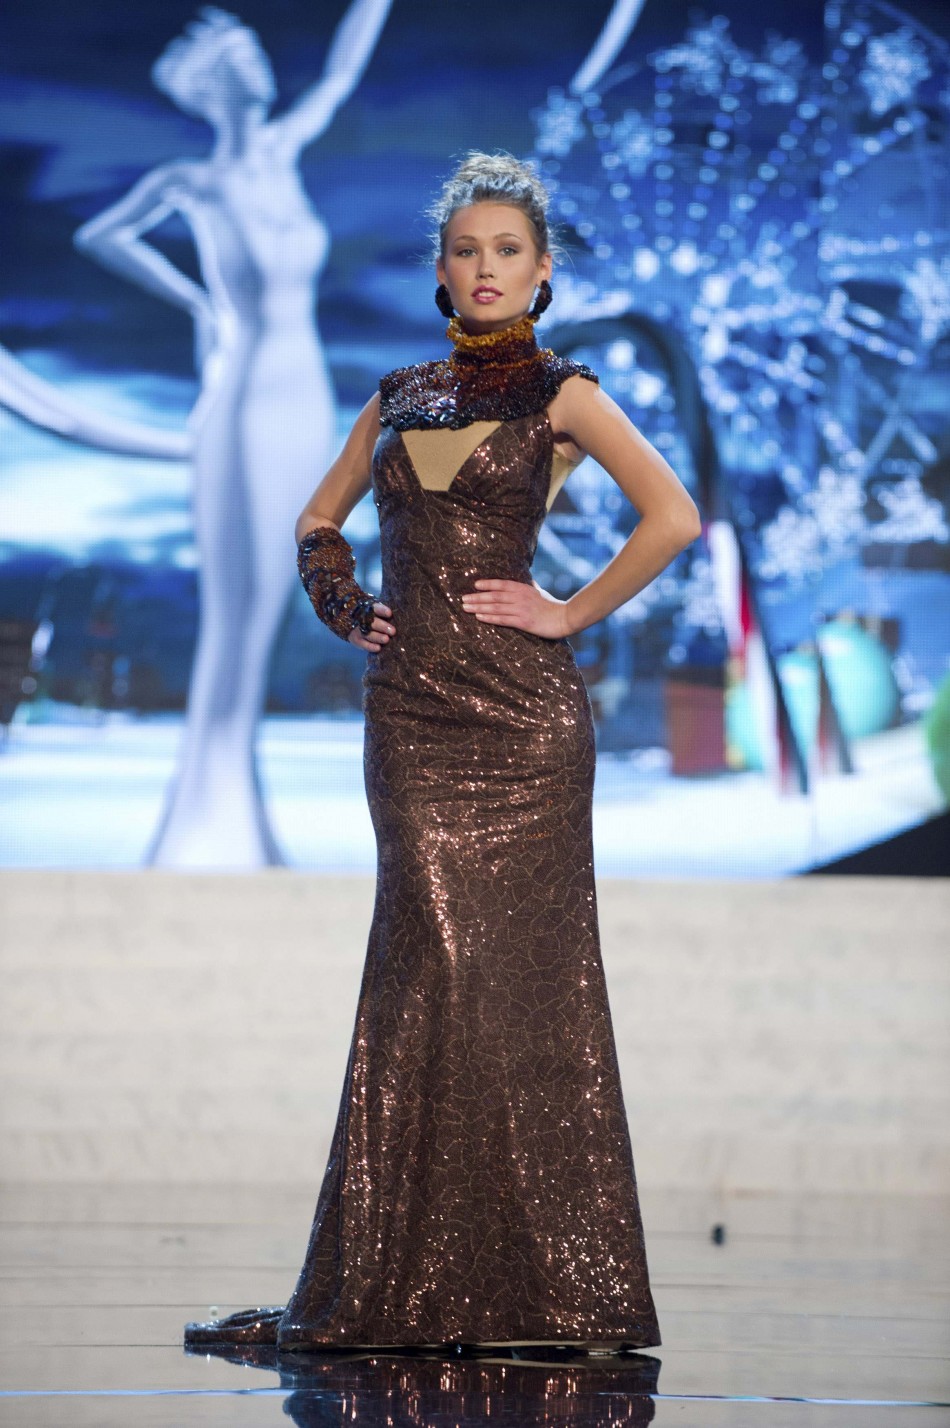 Miss Lithuania Greta Mikalauskyte on stage at the 2012 Miss Universe National Costume Show at PH Live in Las Vegas